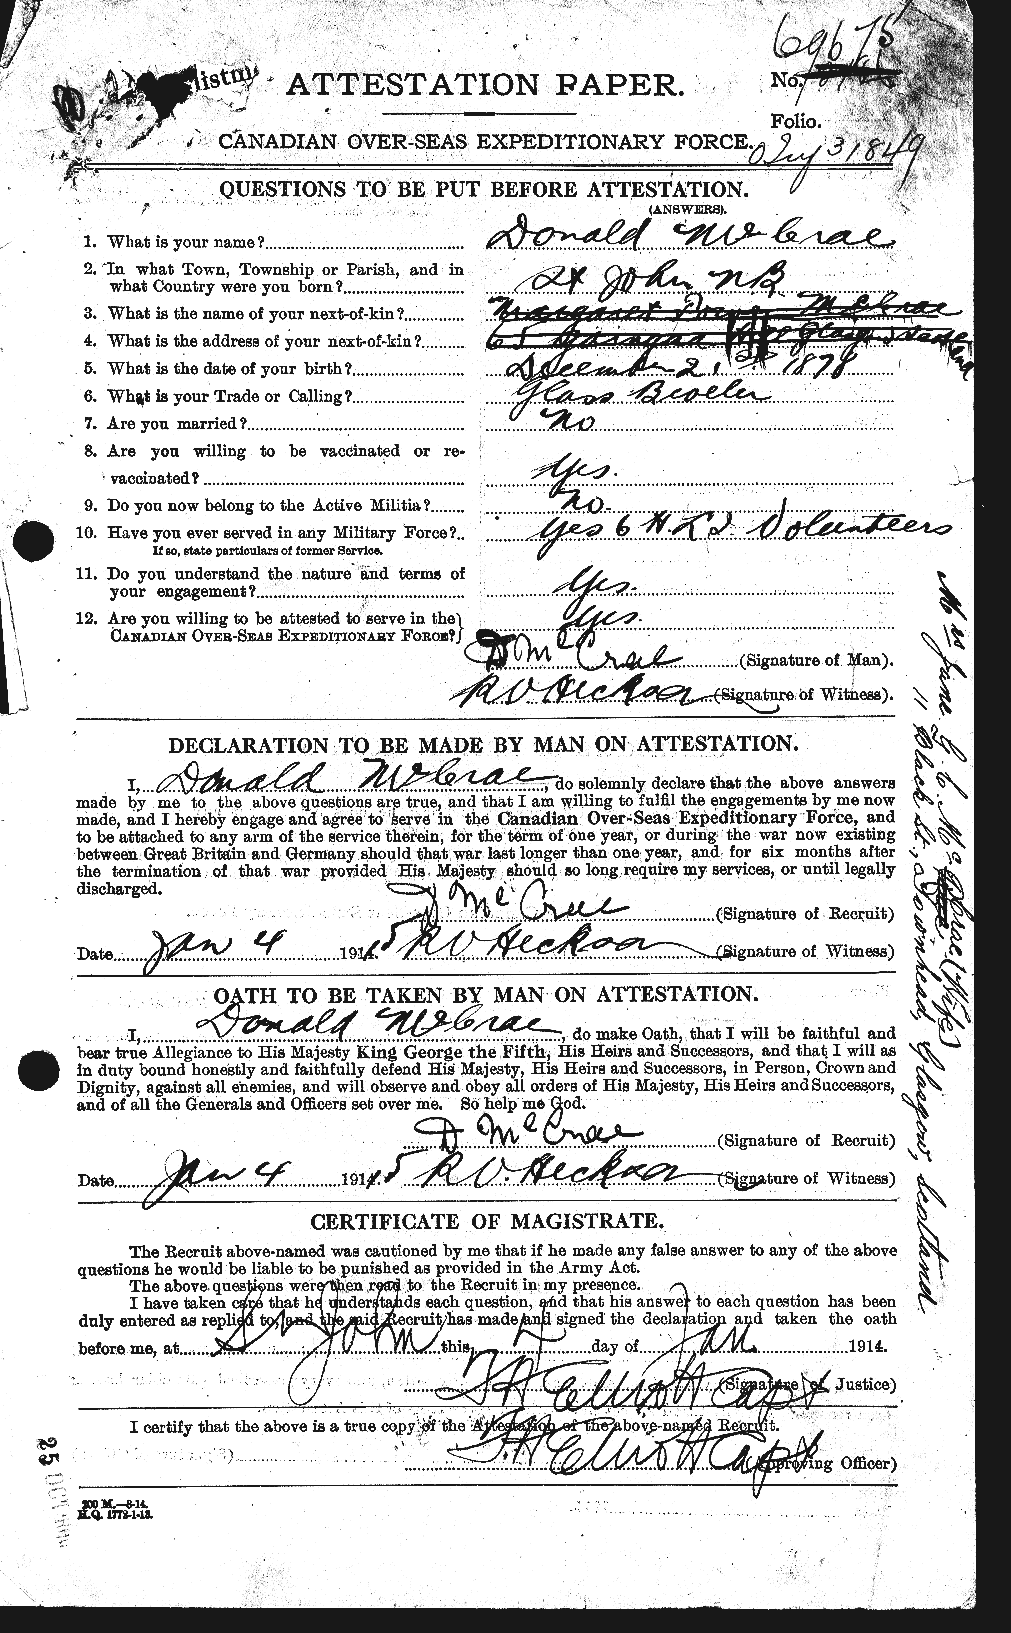 Personnel Records of the First World War - CEF 134545a